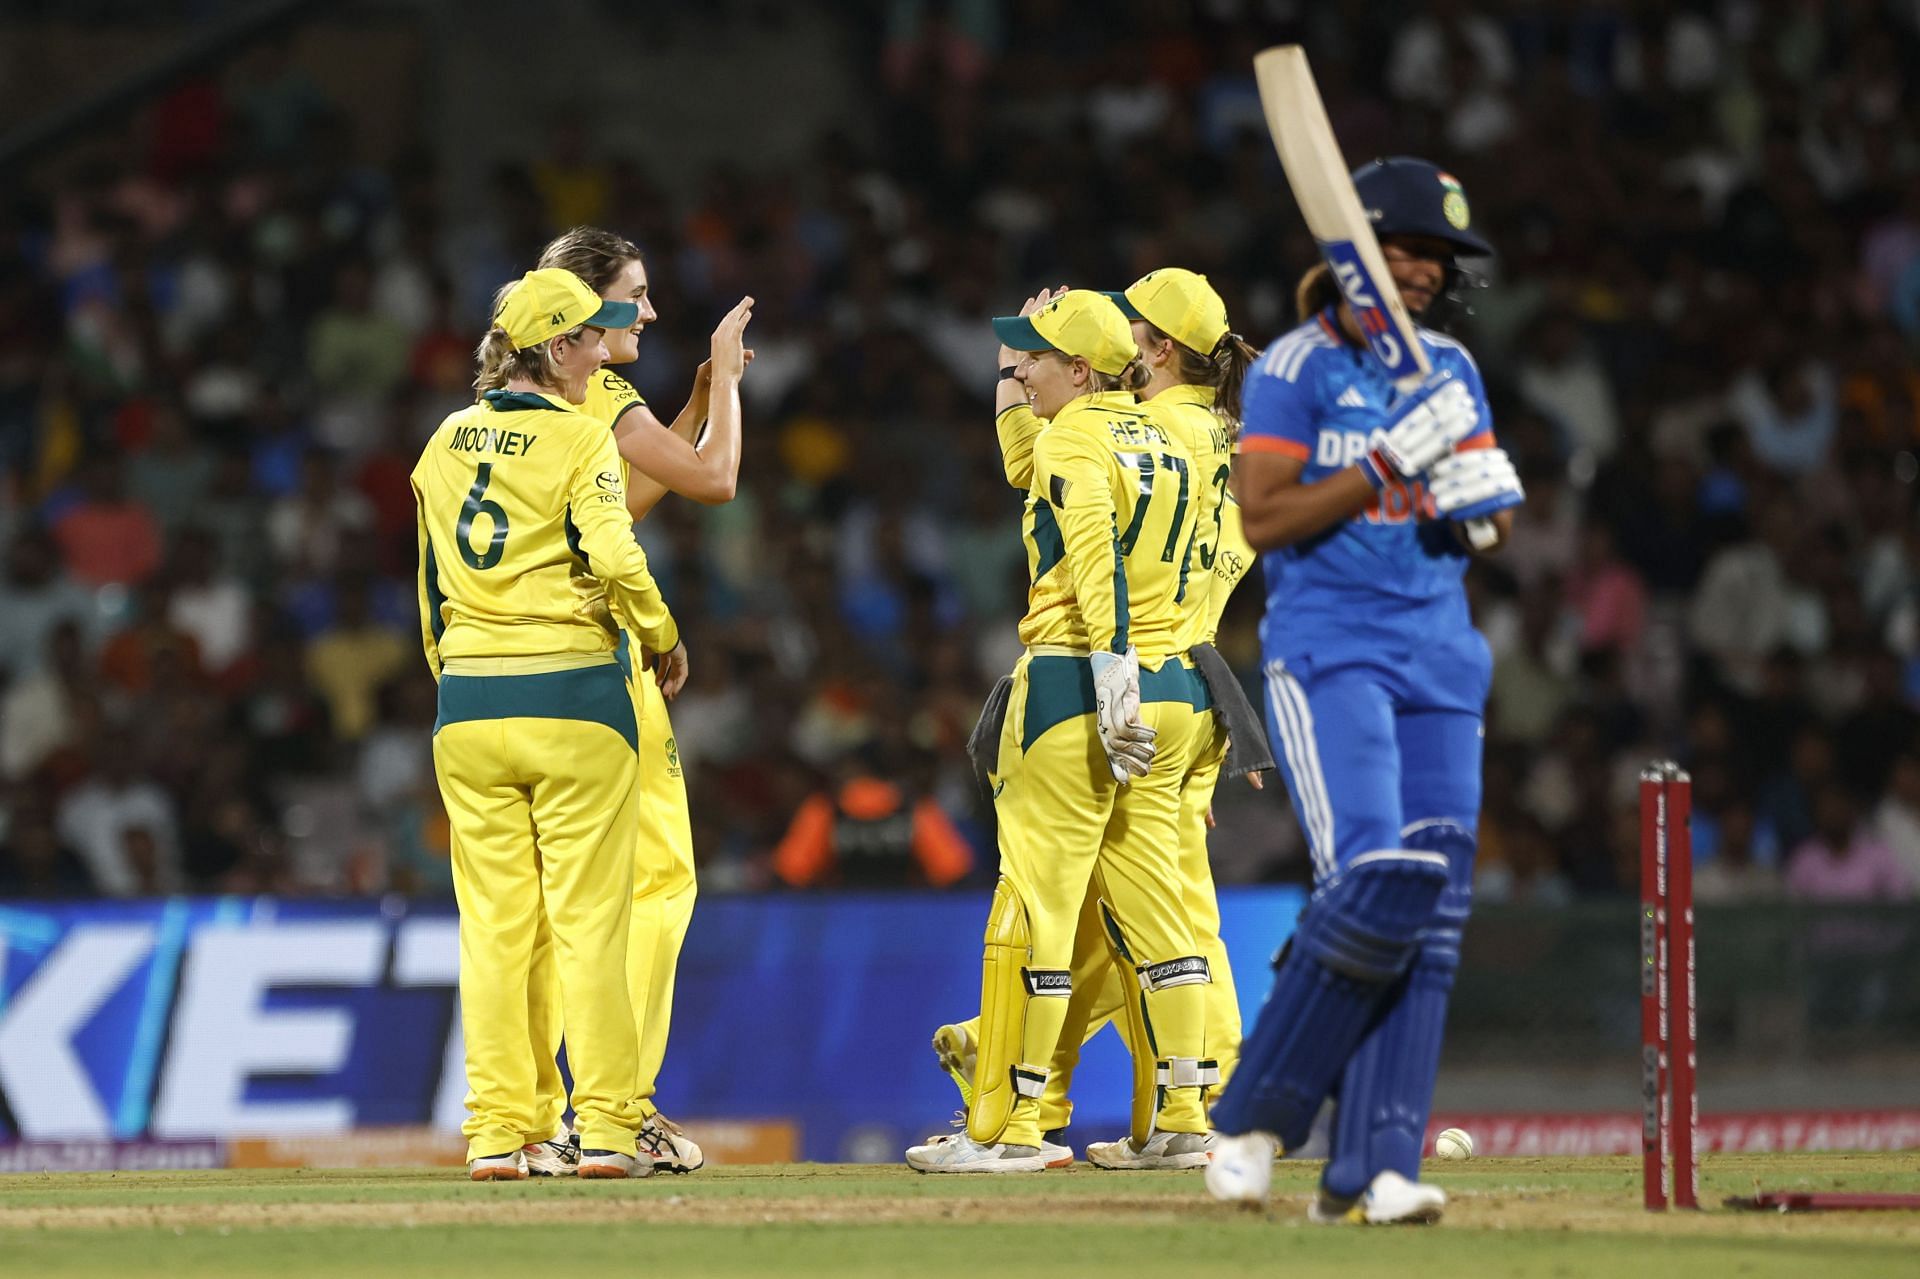 India set below-par targets for Australia in the last two T20Is. [P/C: Getty]